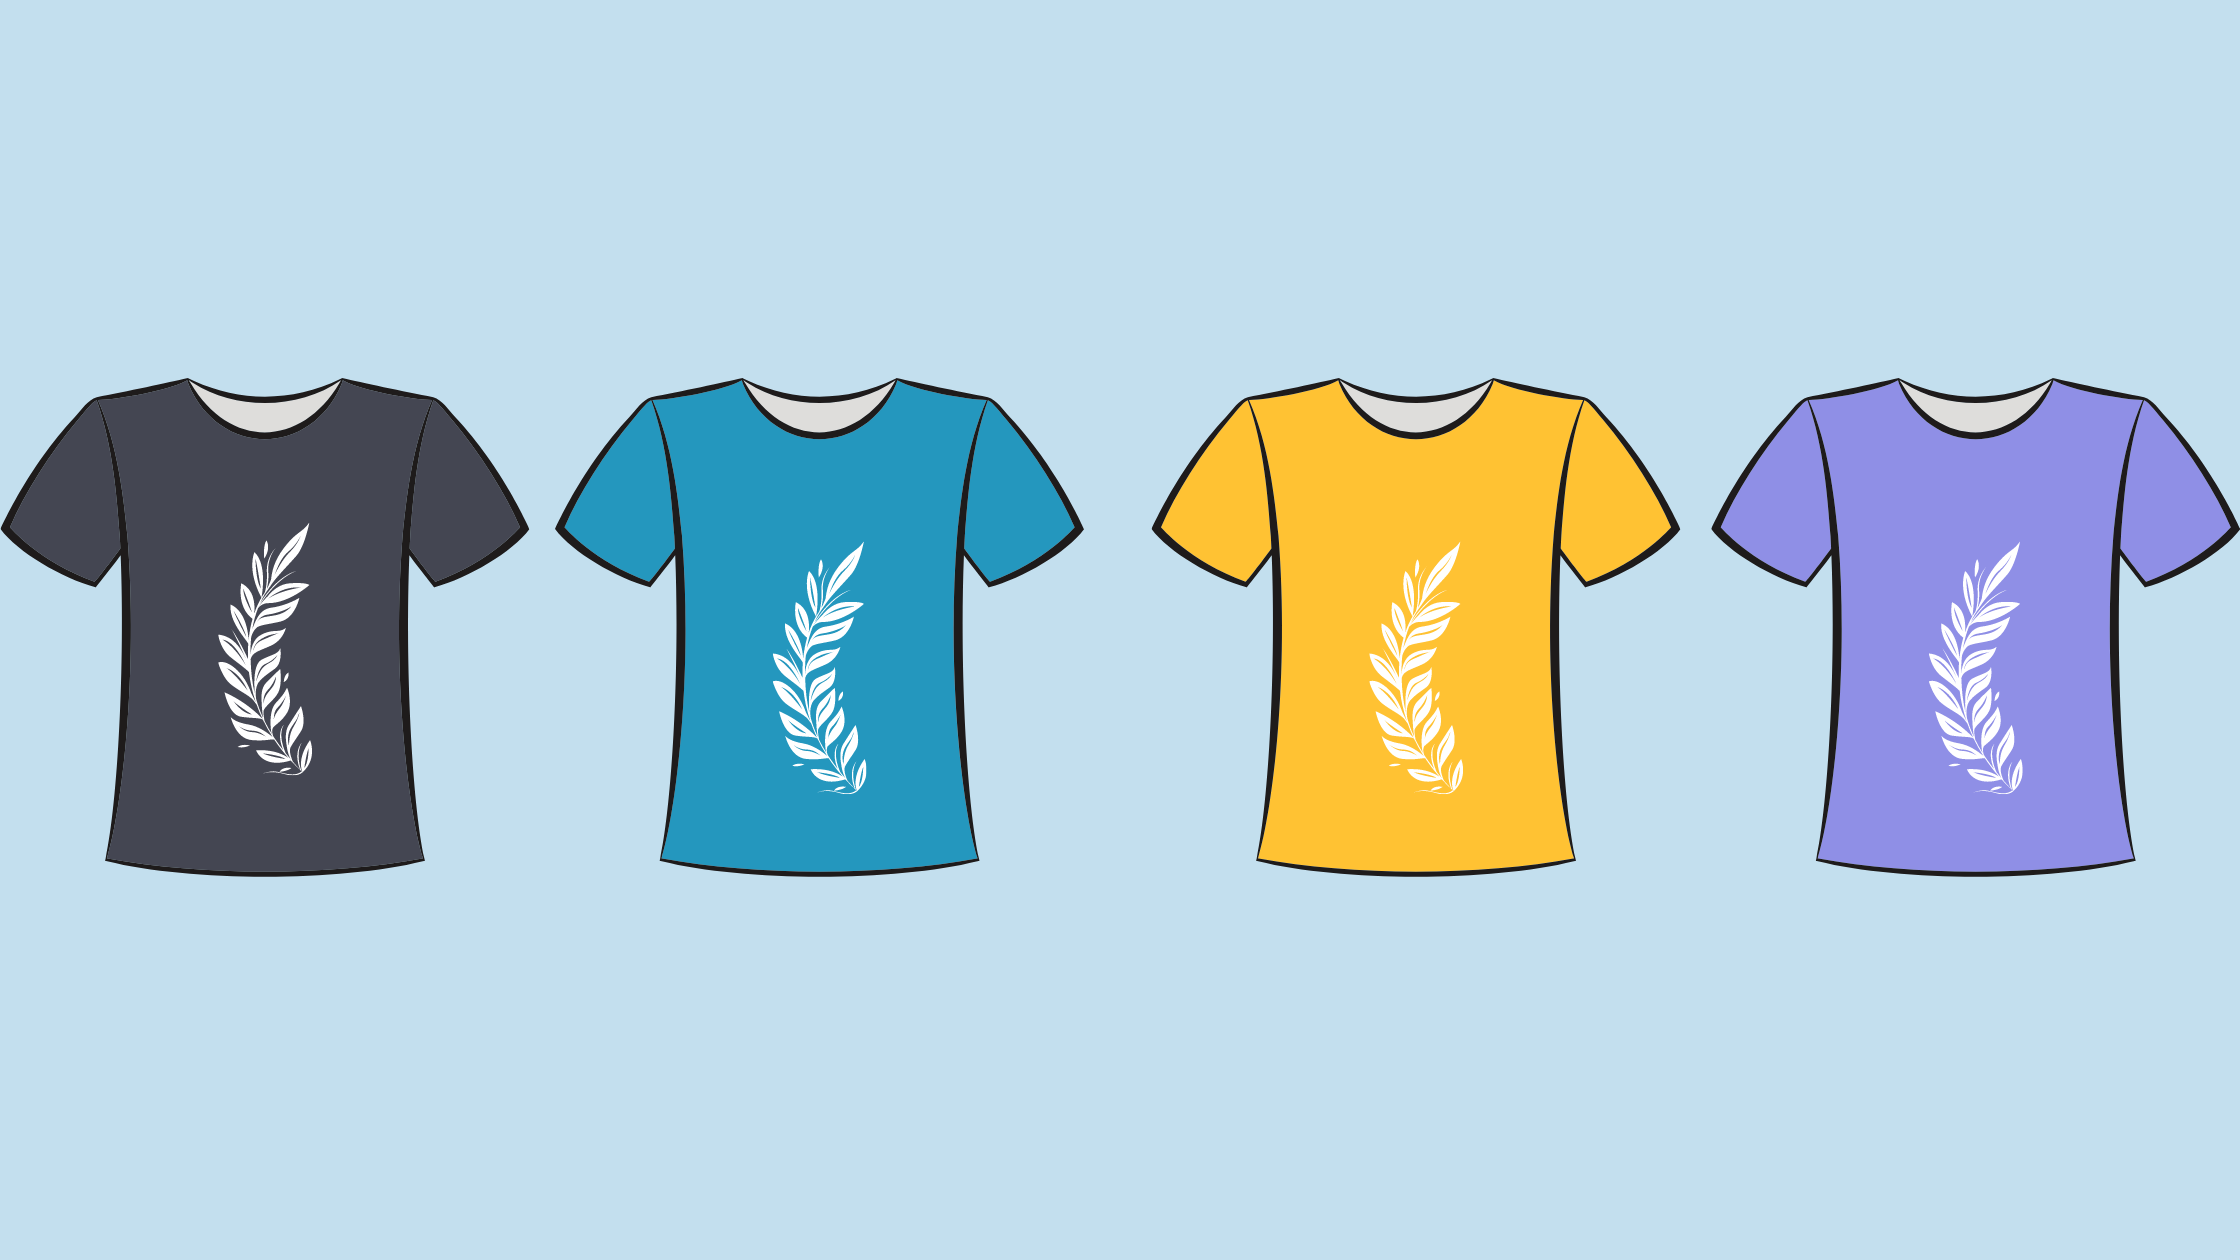 Four different colored T-shirts with the same fern design on them